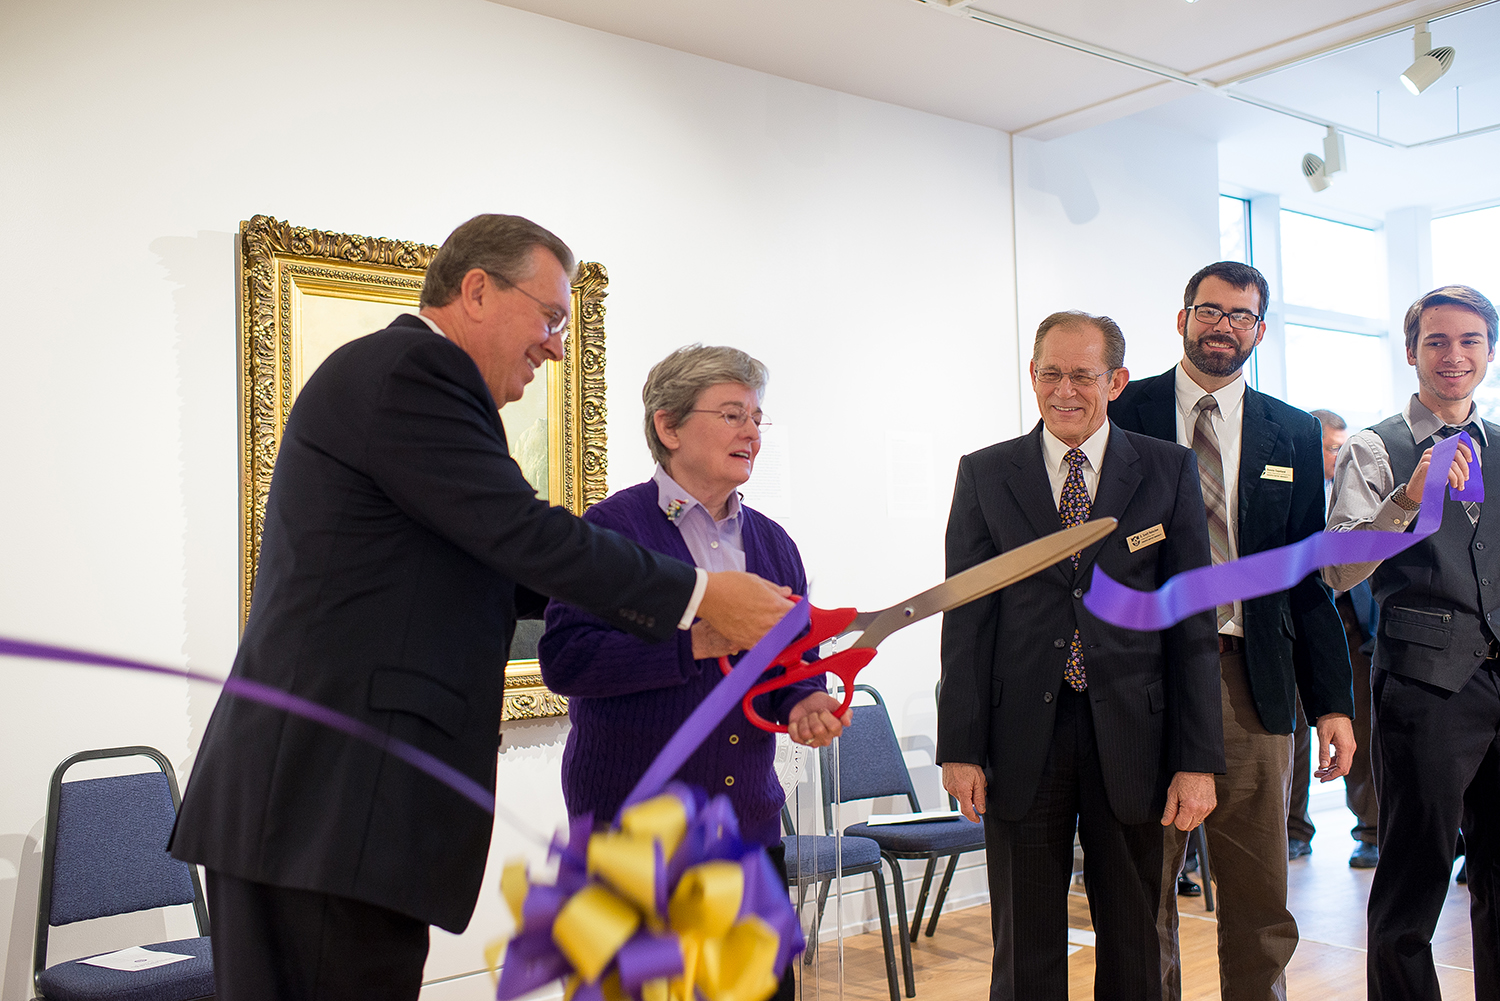 Ouachita dedicates updated and expanded Rosemary Adams Department of Art and Design.